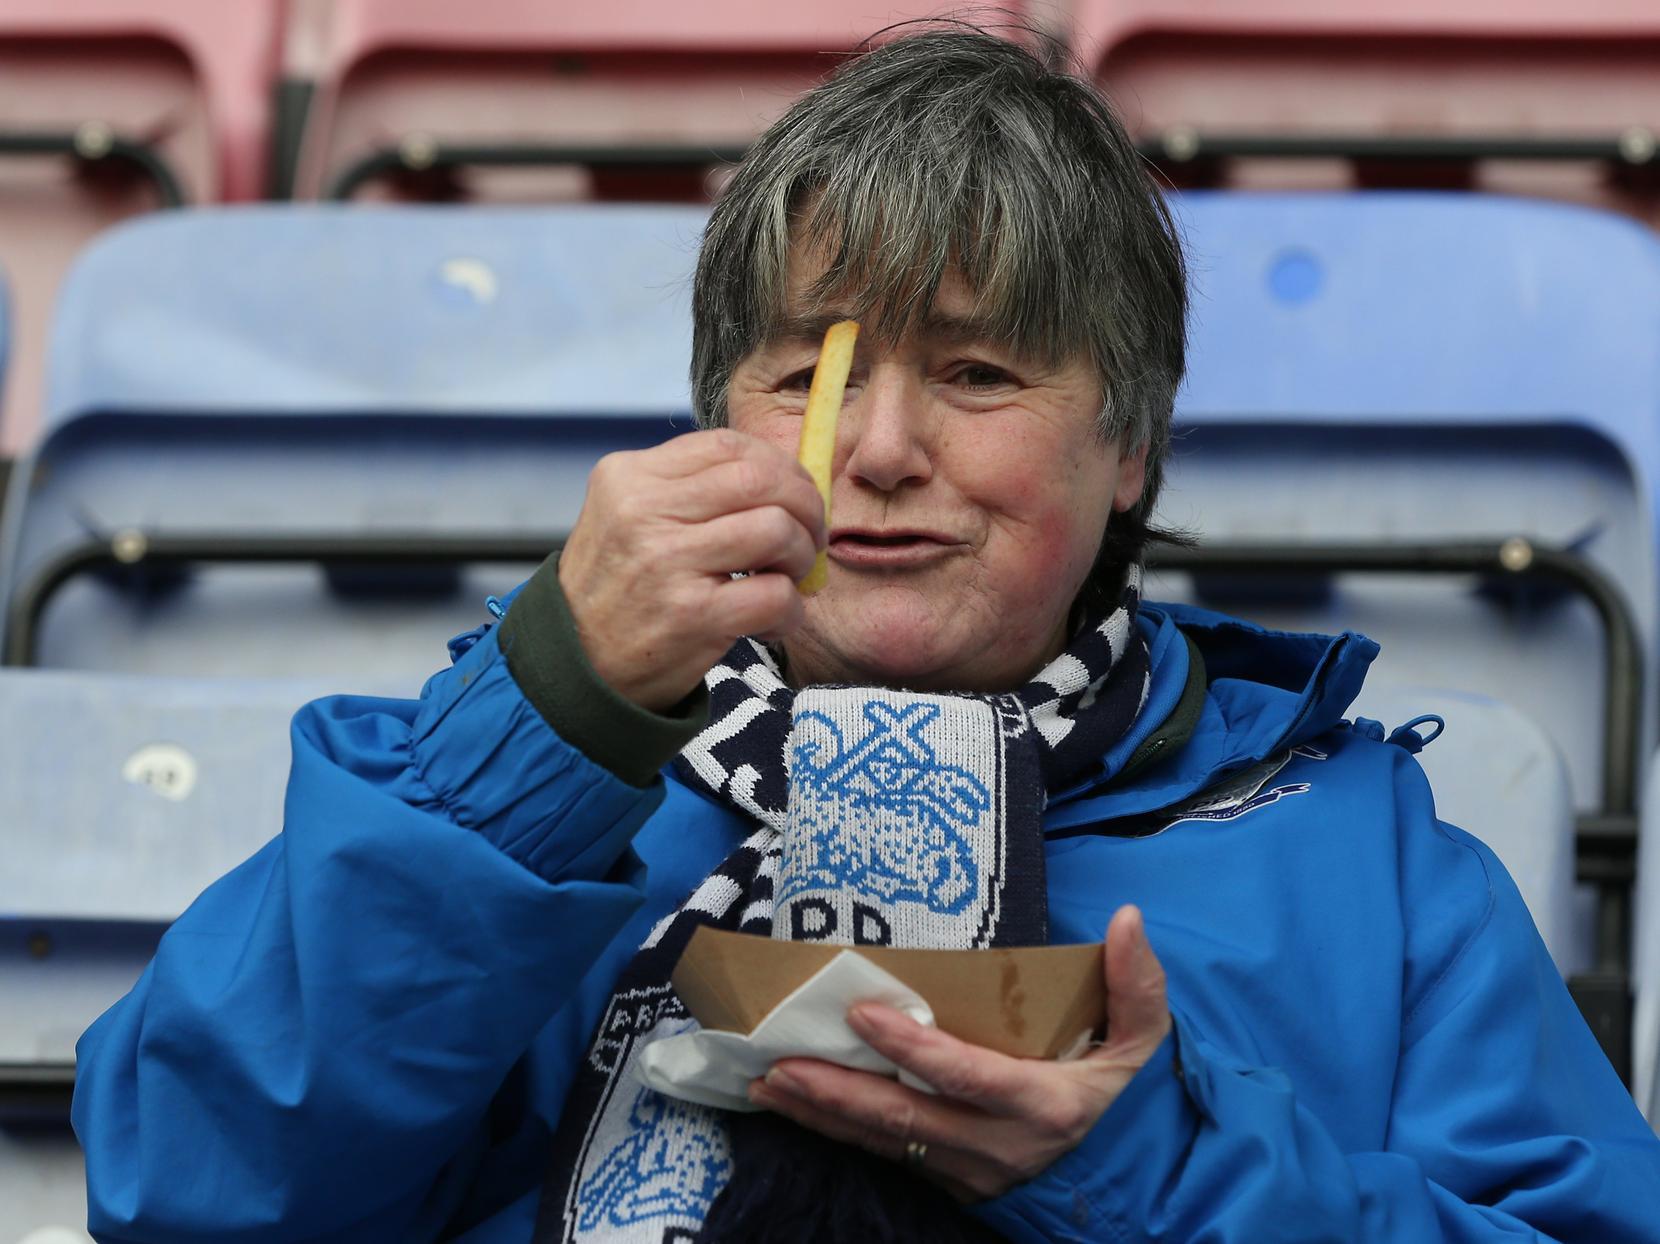 One fan looks pretty satisfied with their food.